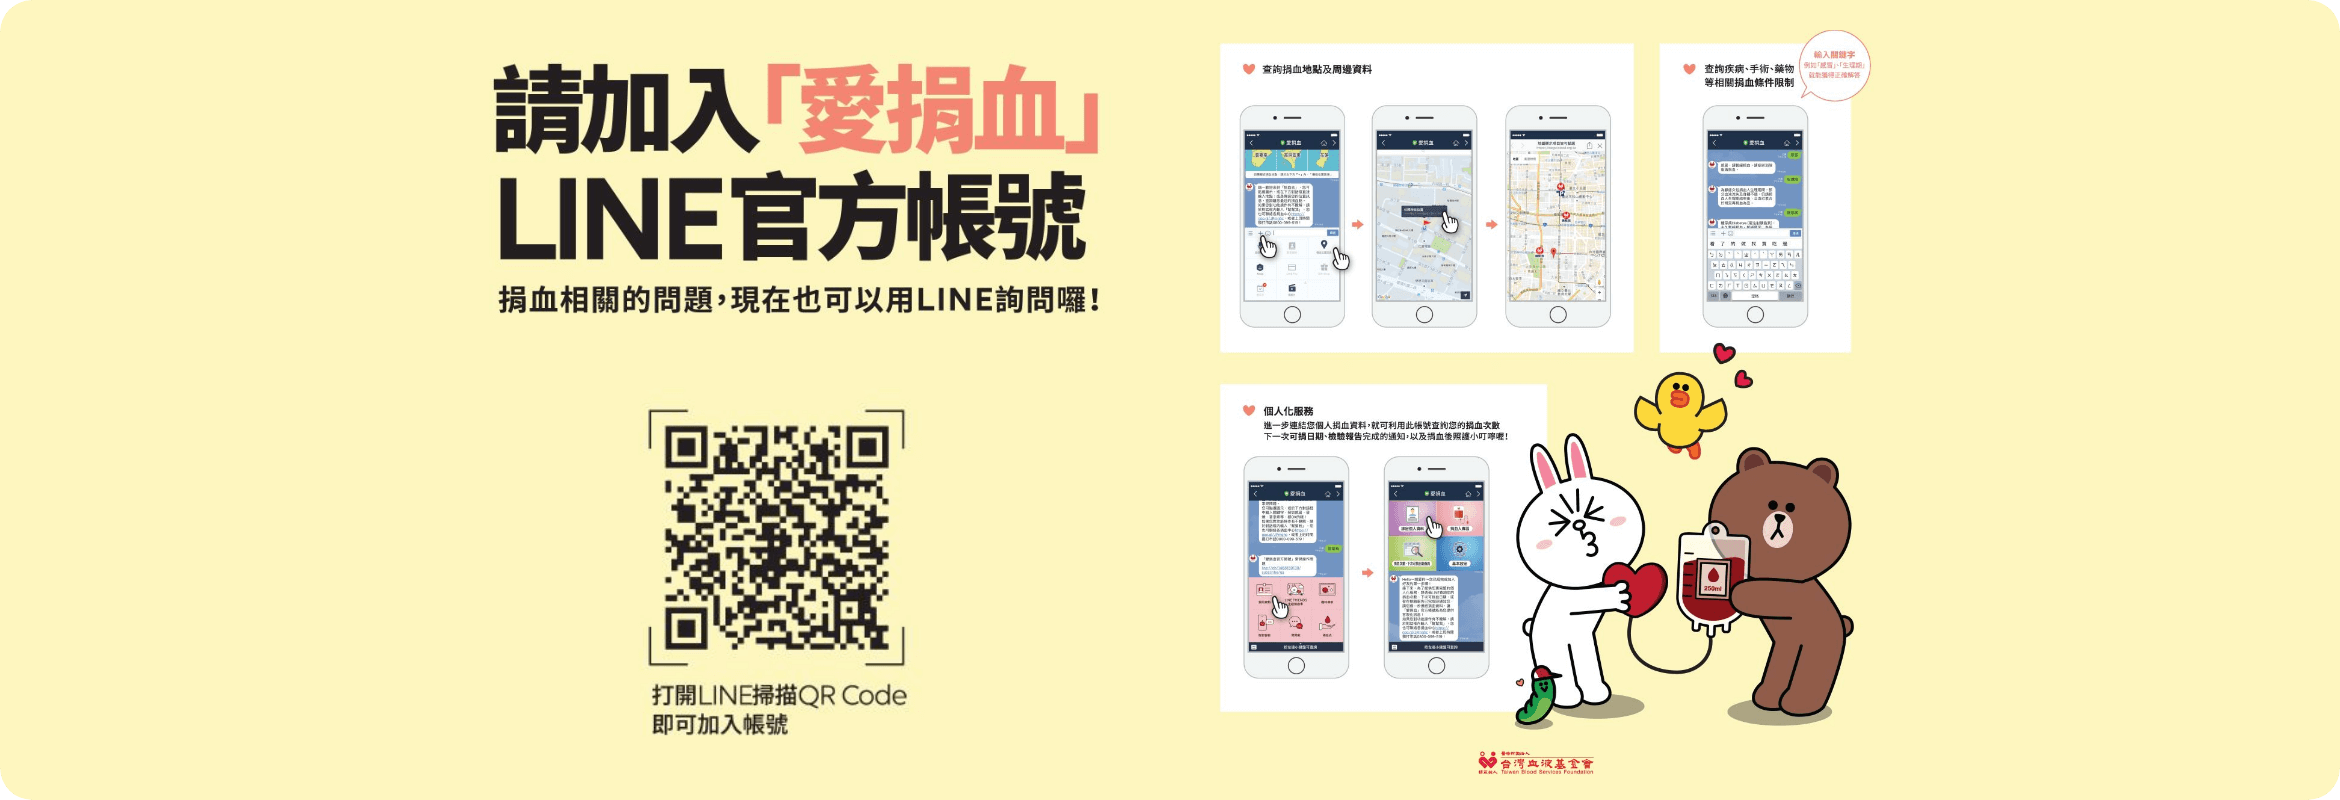 The image shows the official LINE account 'Blood Donation Love,' with a QR code available for scanning to join